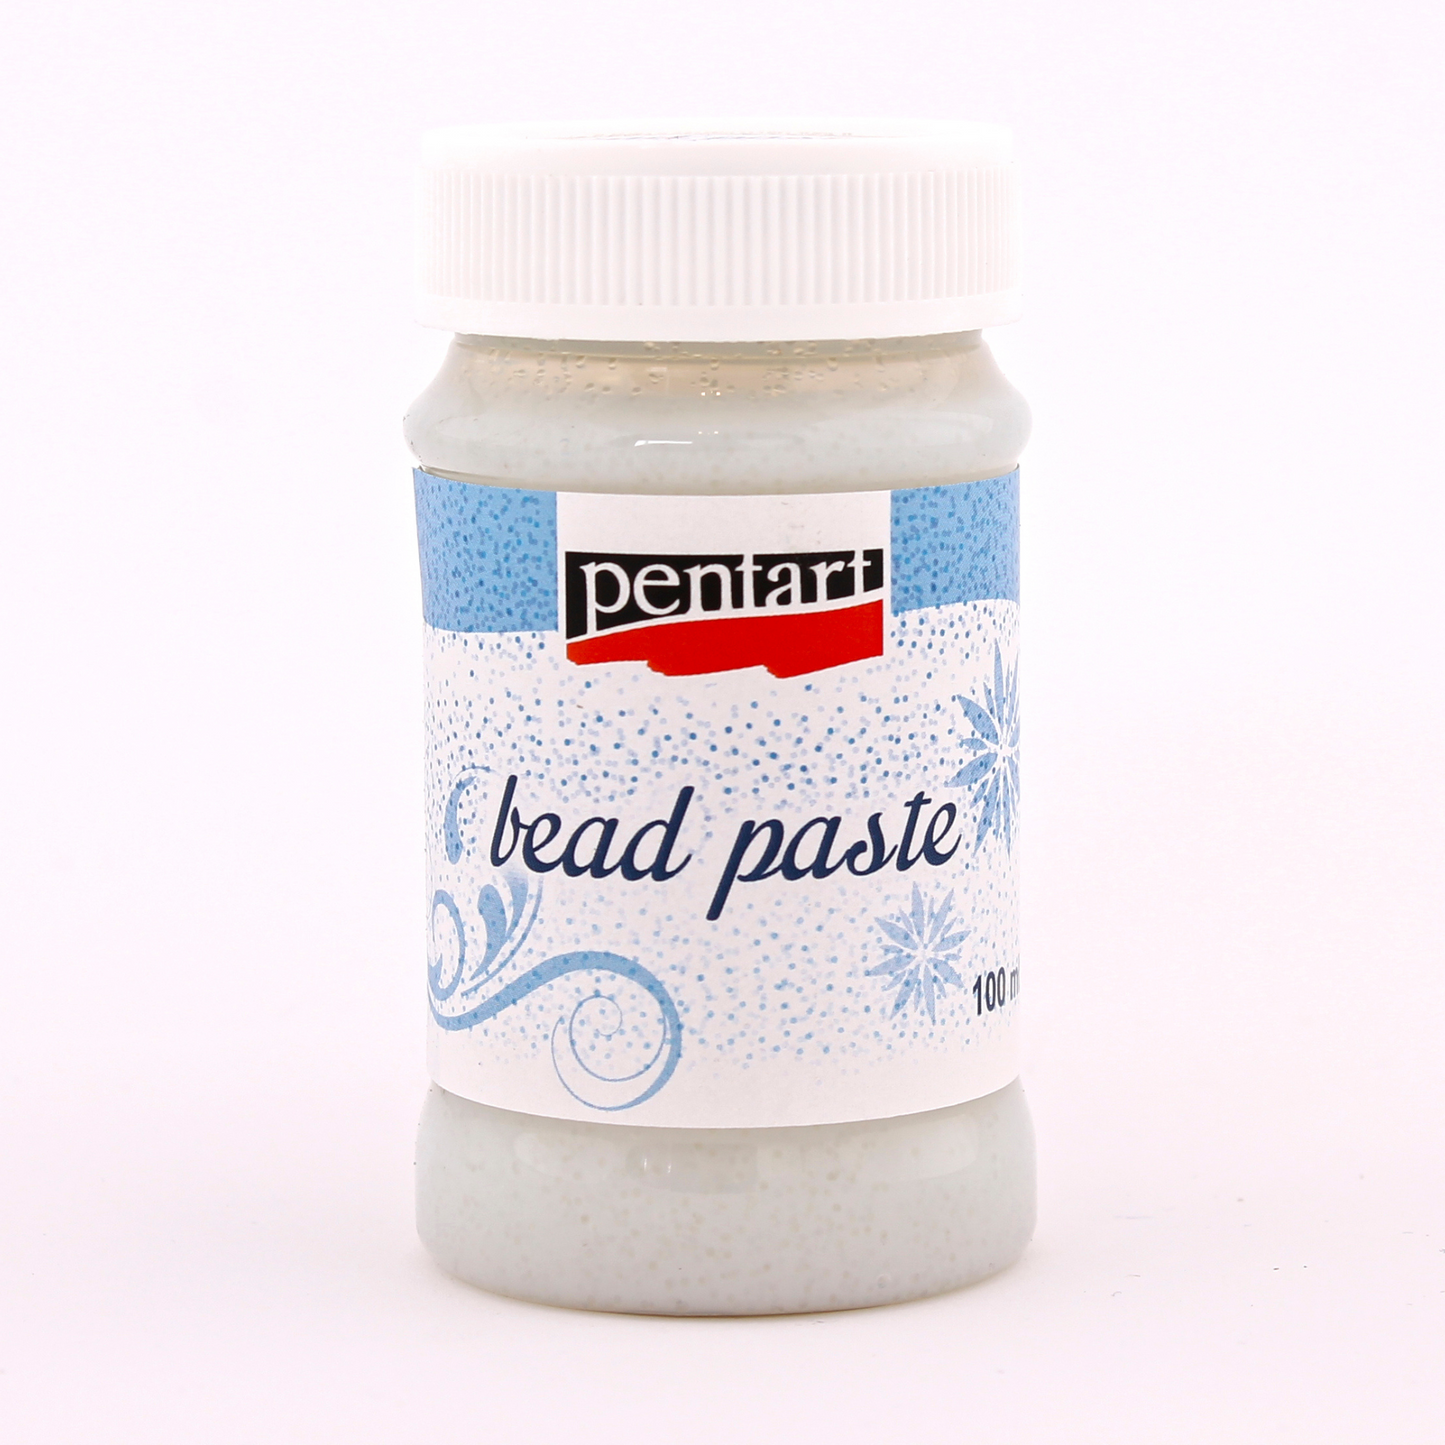 Bead Paste by Pentart. Available at Milton's Daughter.